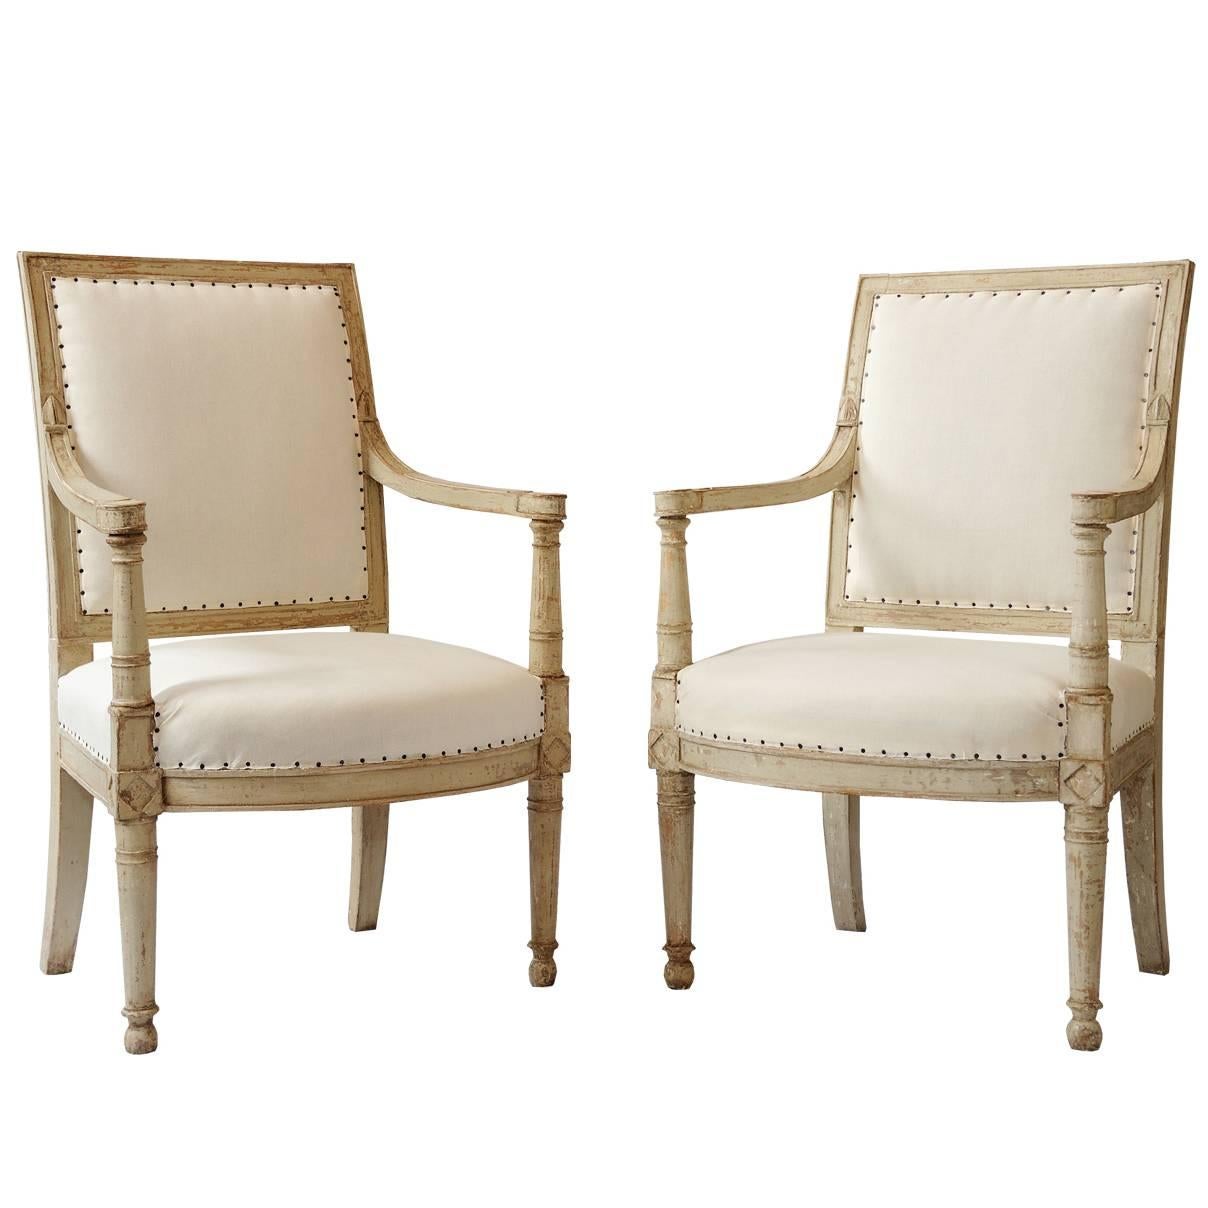 Pair of Napoleonic Painted Open Armchairs by Jacob-Desmalter, circa 1805 For Sale